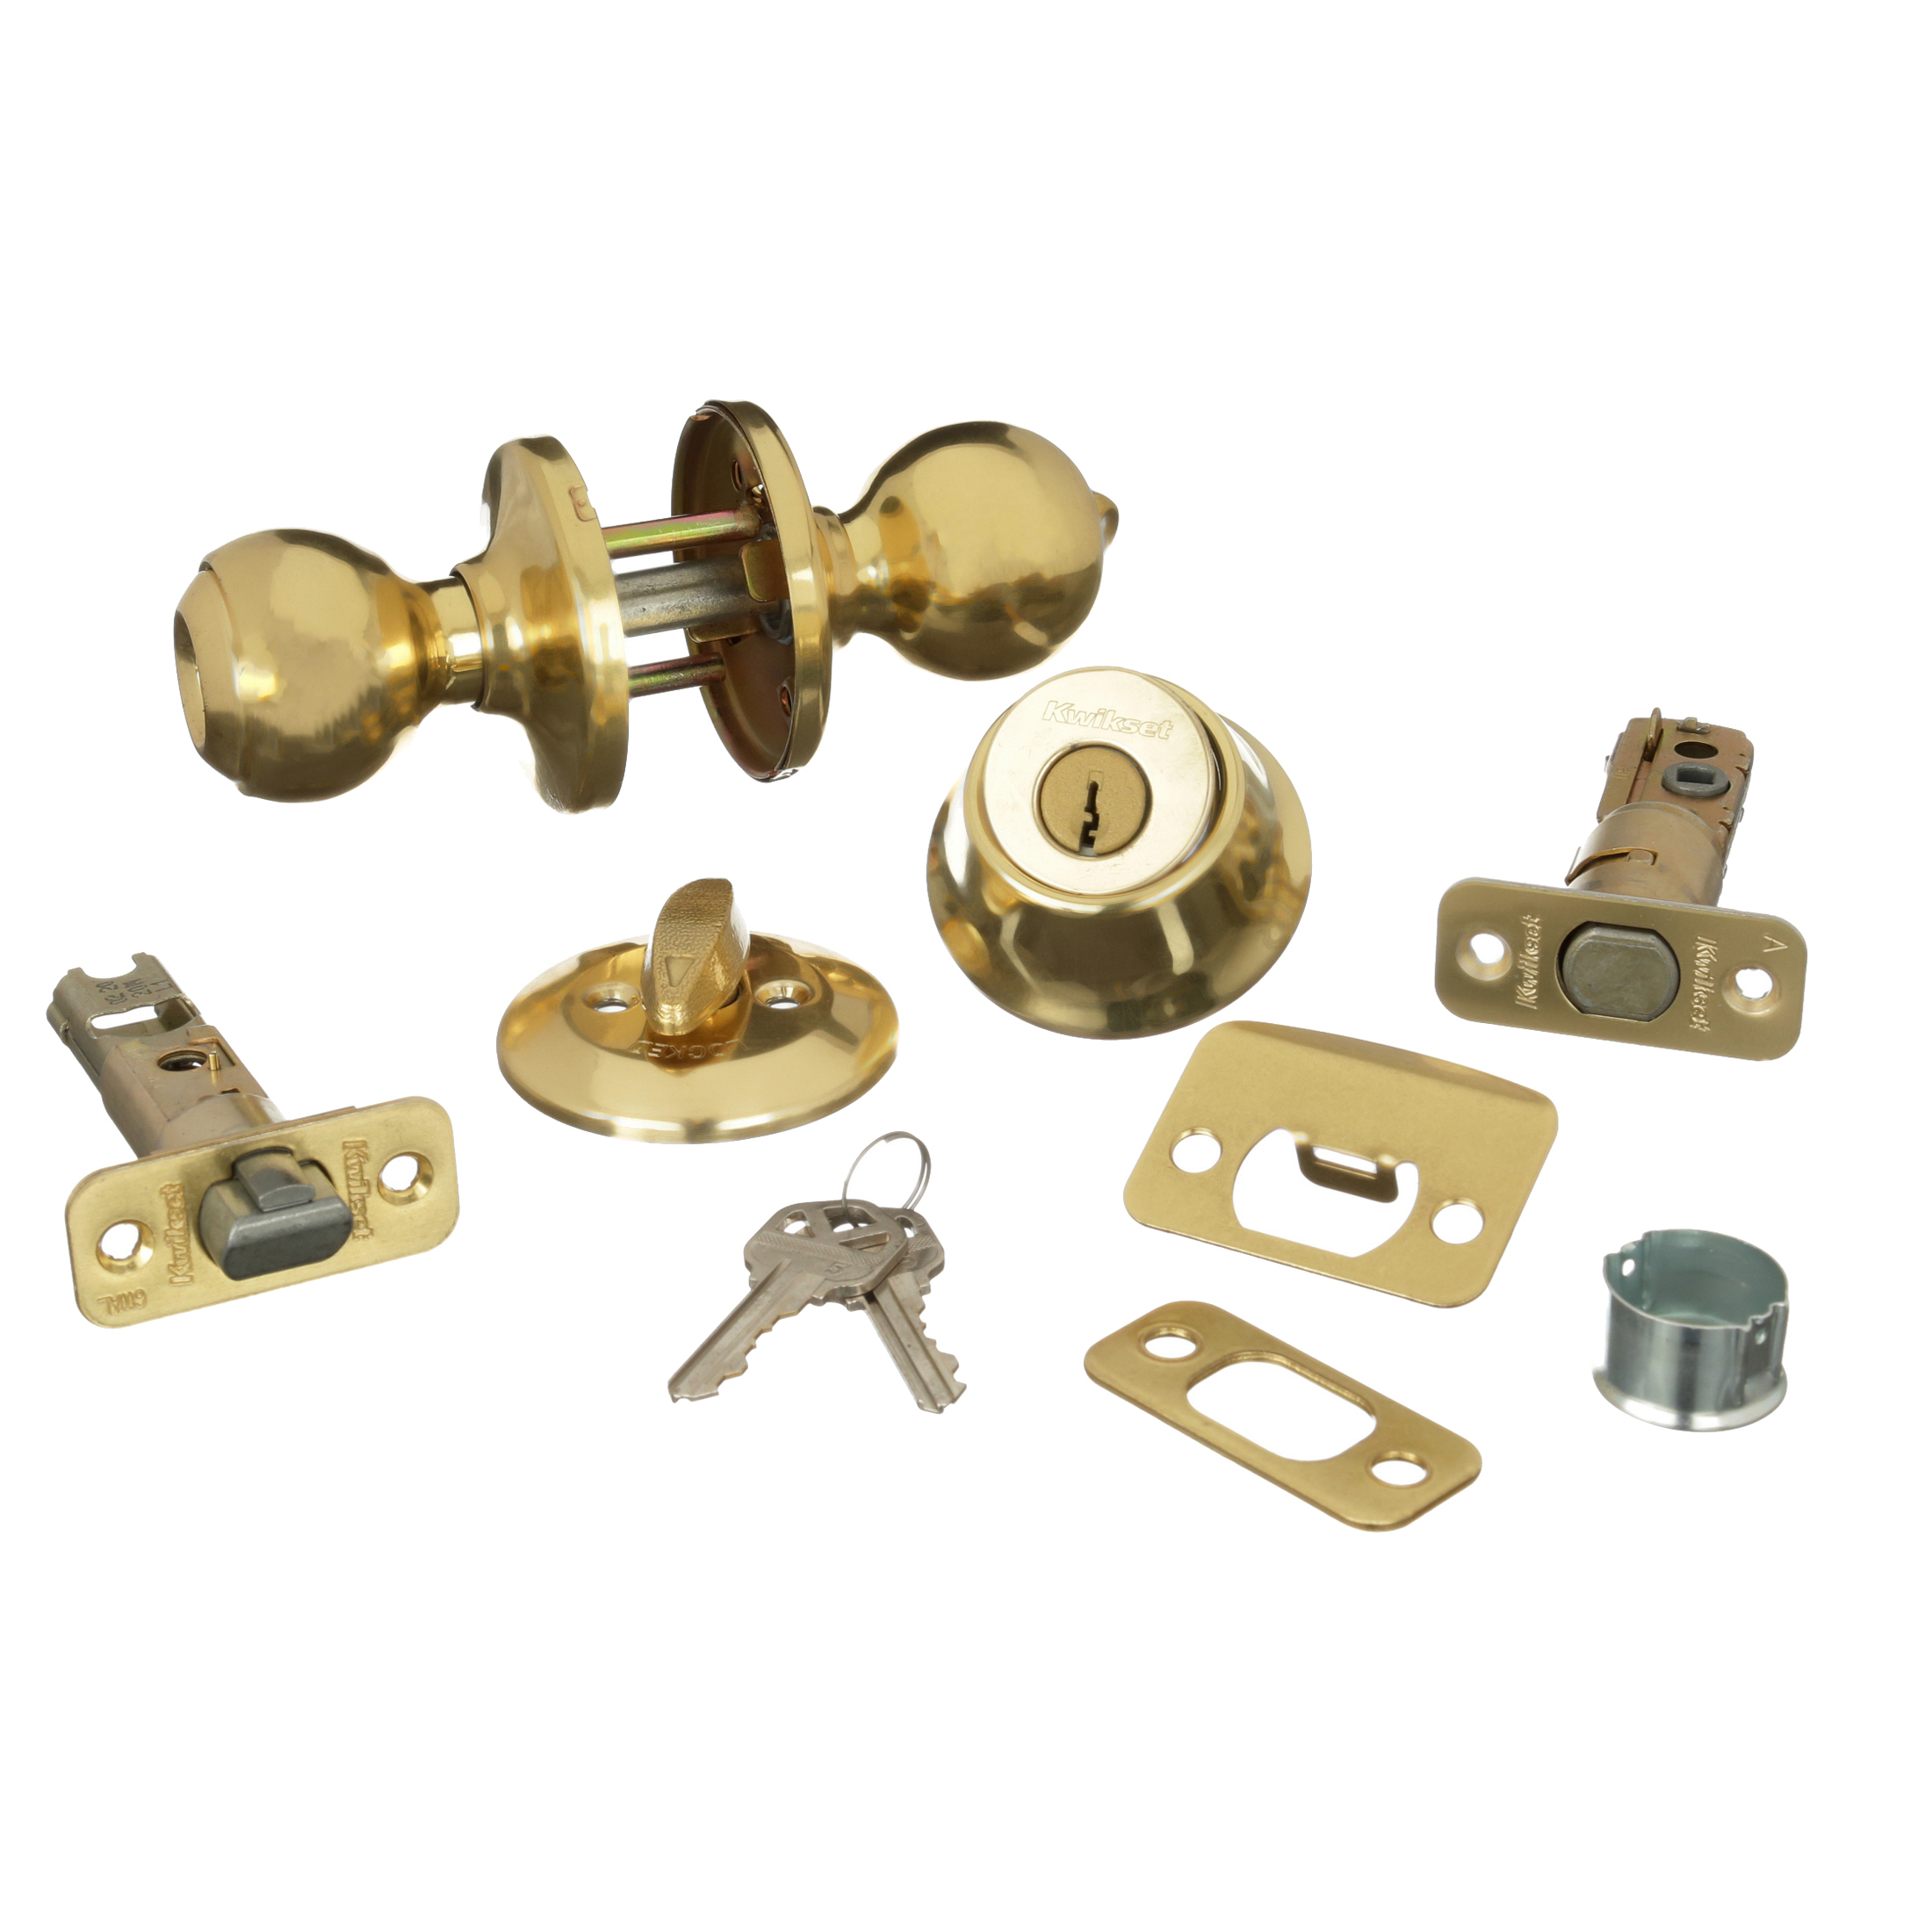 Kwikset 690 Polo Keyed Entry Knob And Sgl Cyl Deadbolt Combo Pack in PB 